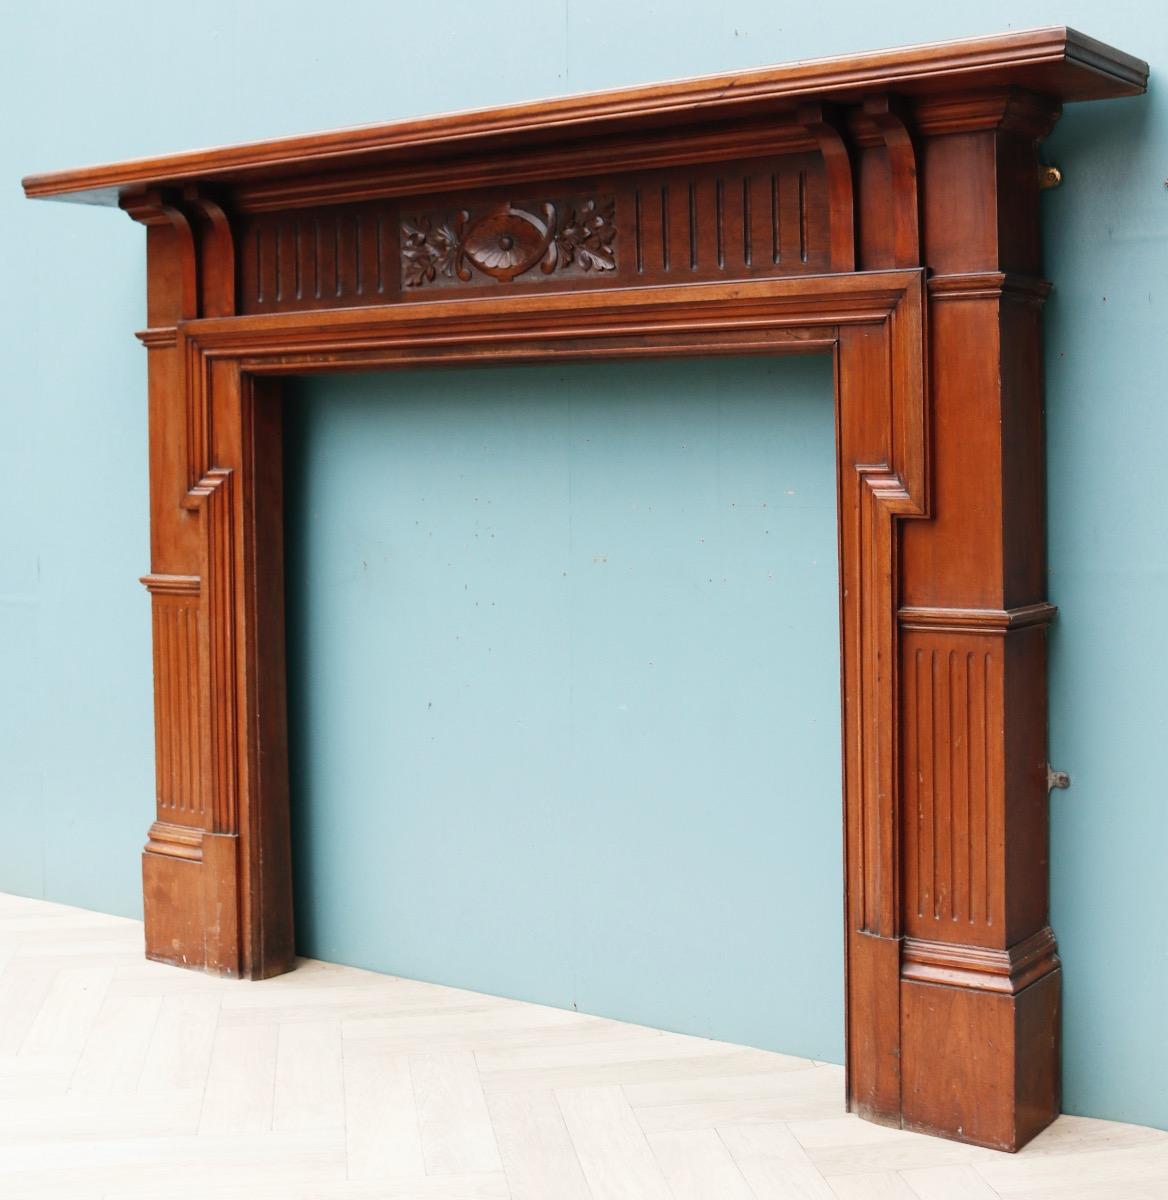 Victorian Style Reclaimed Walnut Mantel In Fair Condition For Sale In Wormelow, Herefordshire